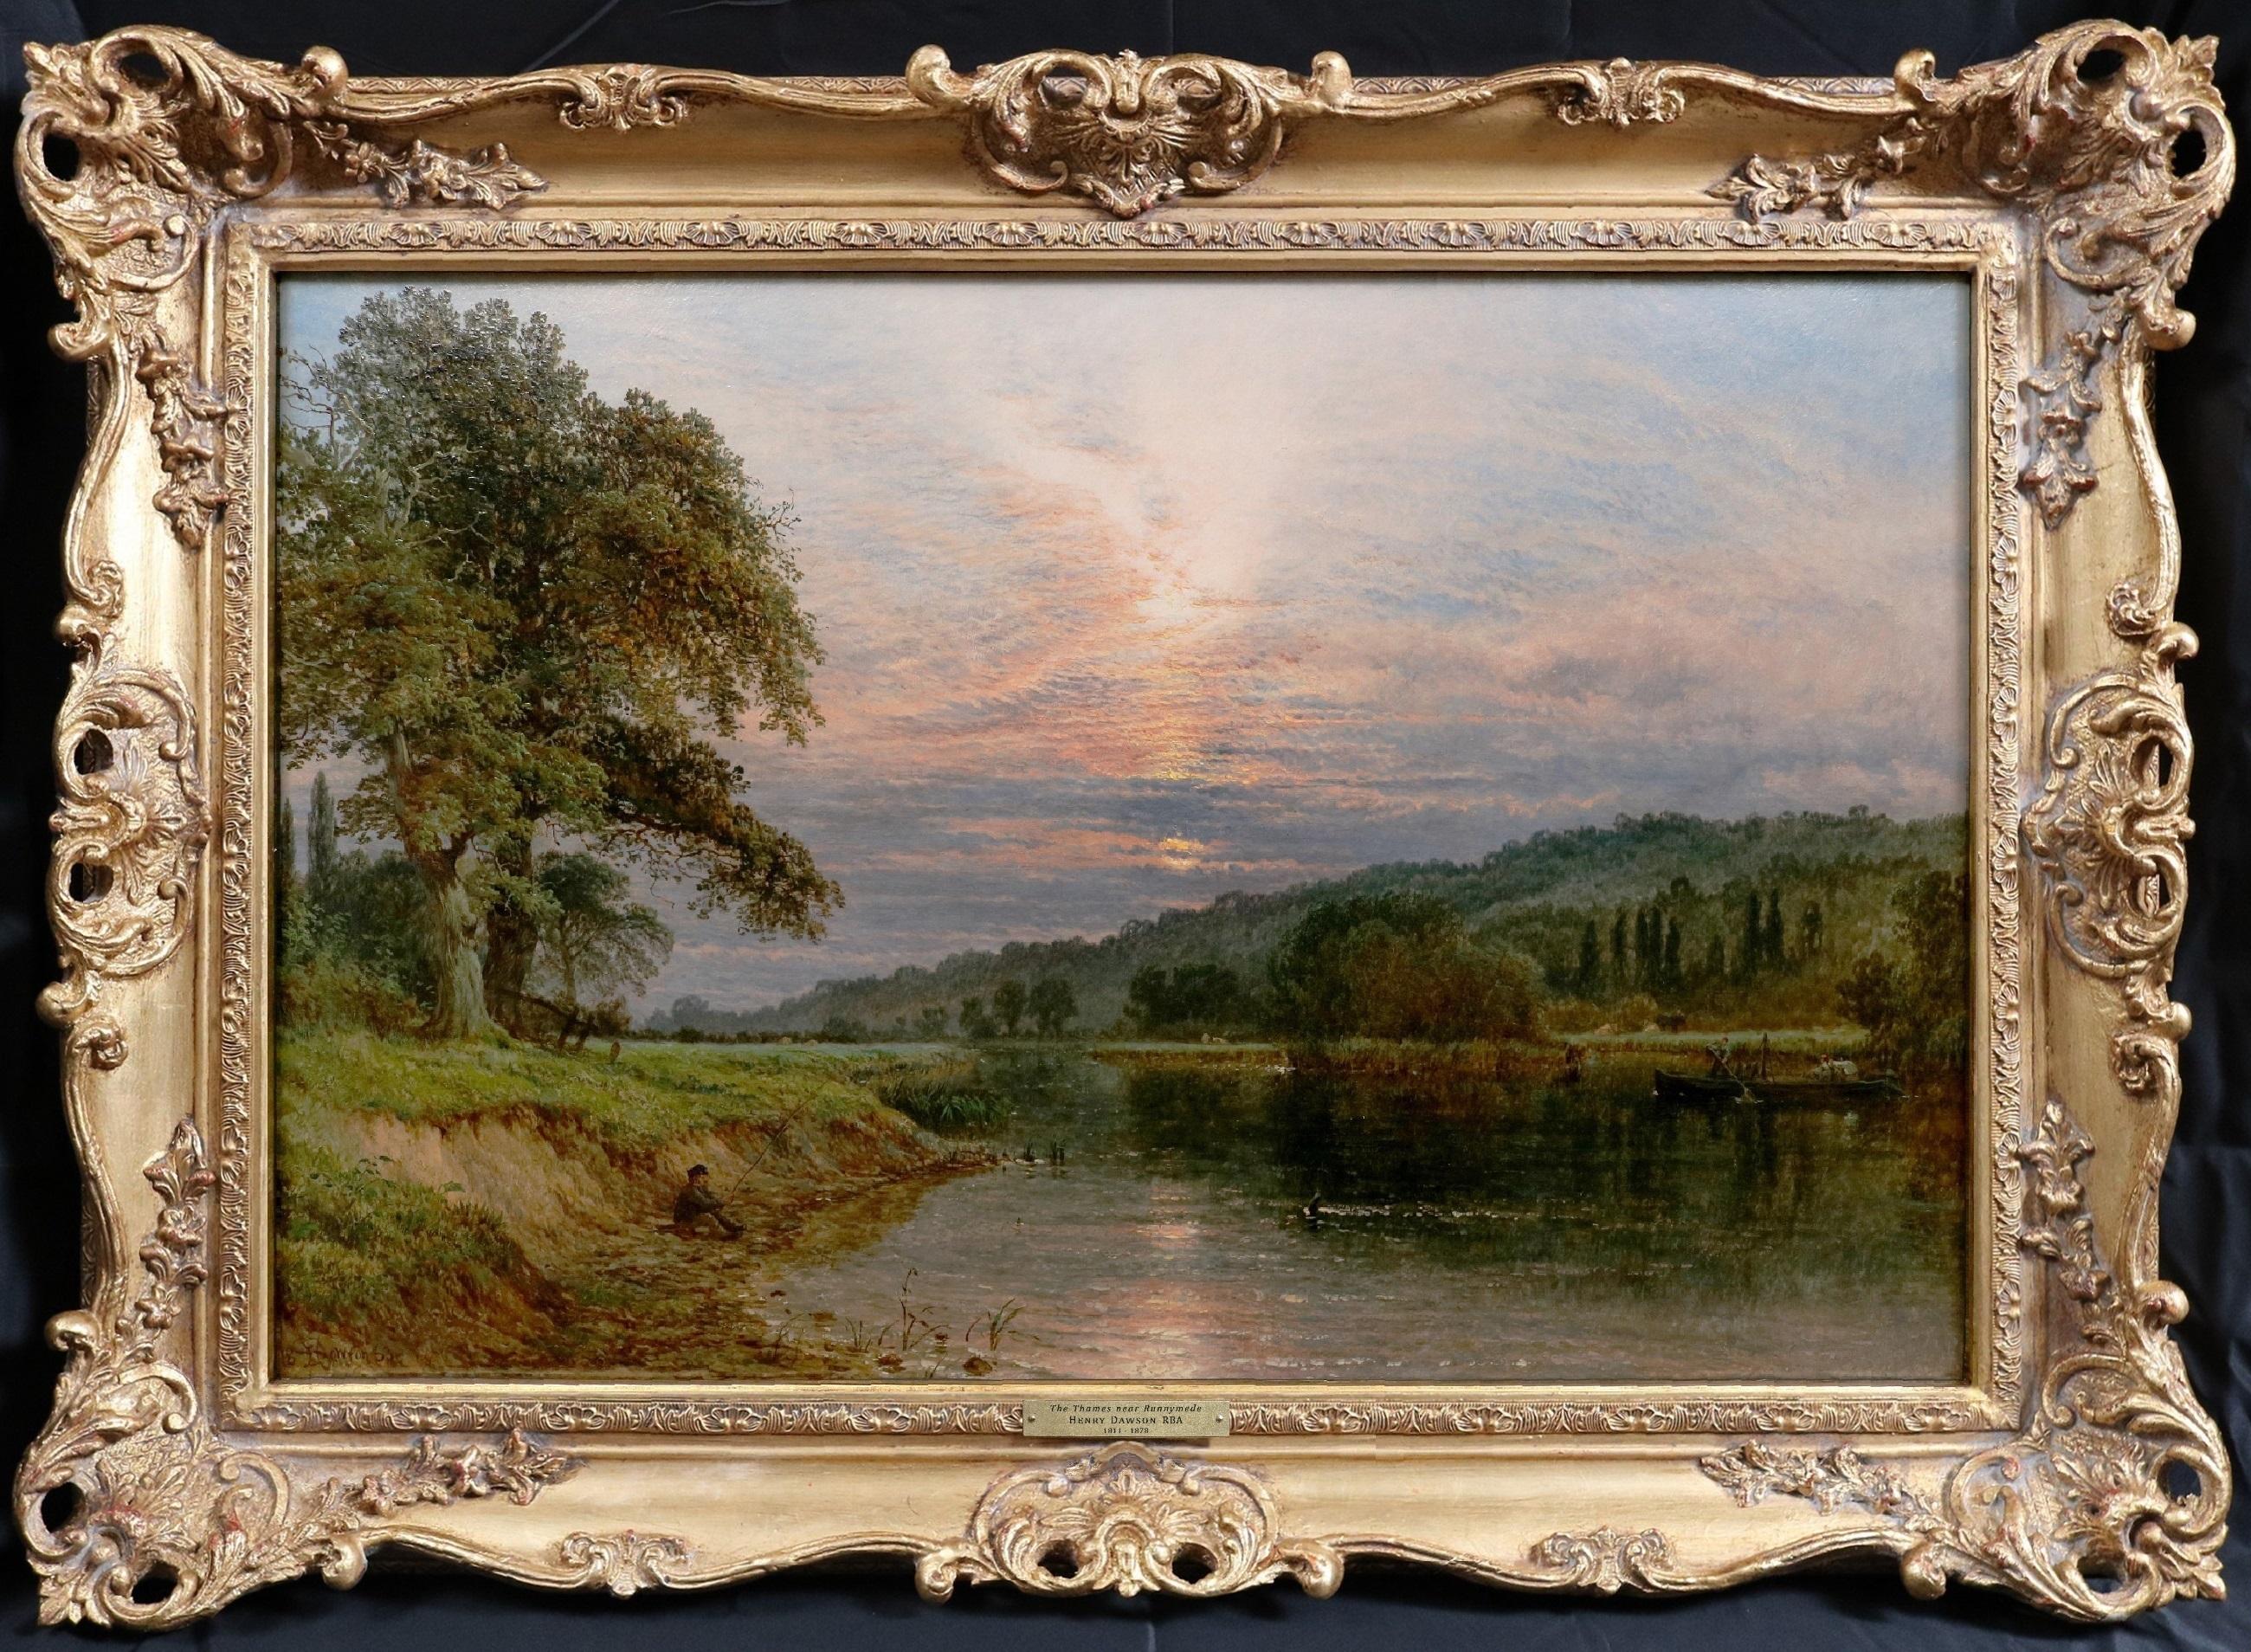 ‘The Thames near Runnymede’ by Henry Dawson R.B.A. (1811-1878). 

The painting – which depicts an angler fishing on the riverbank under a spectacular evening sunset – is signed by the artist and dated 1863.

Although a student of James Baker Pyne